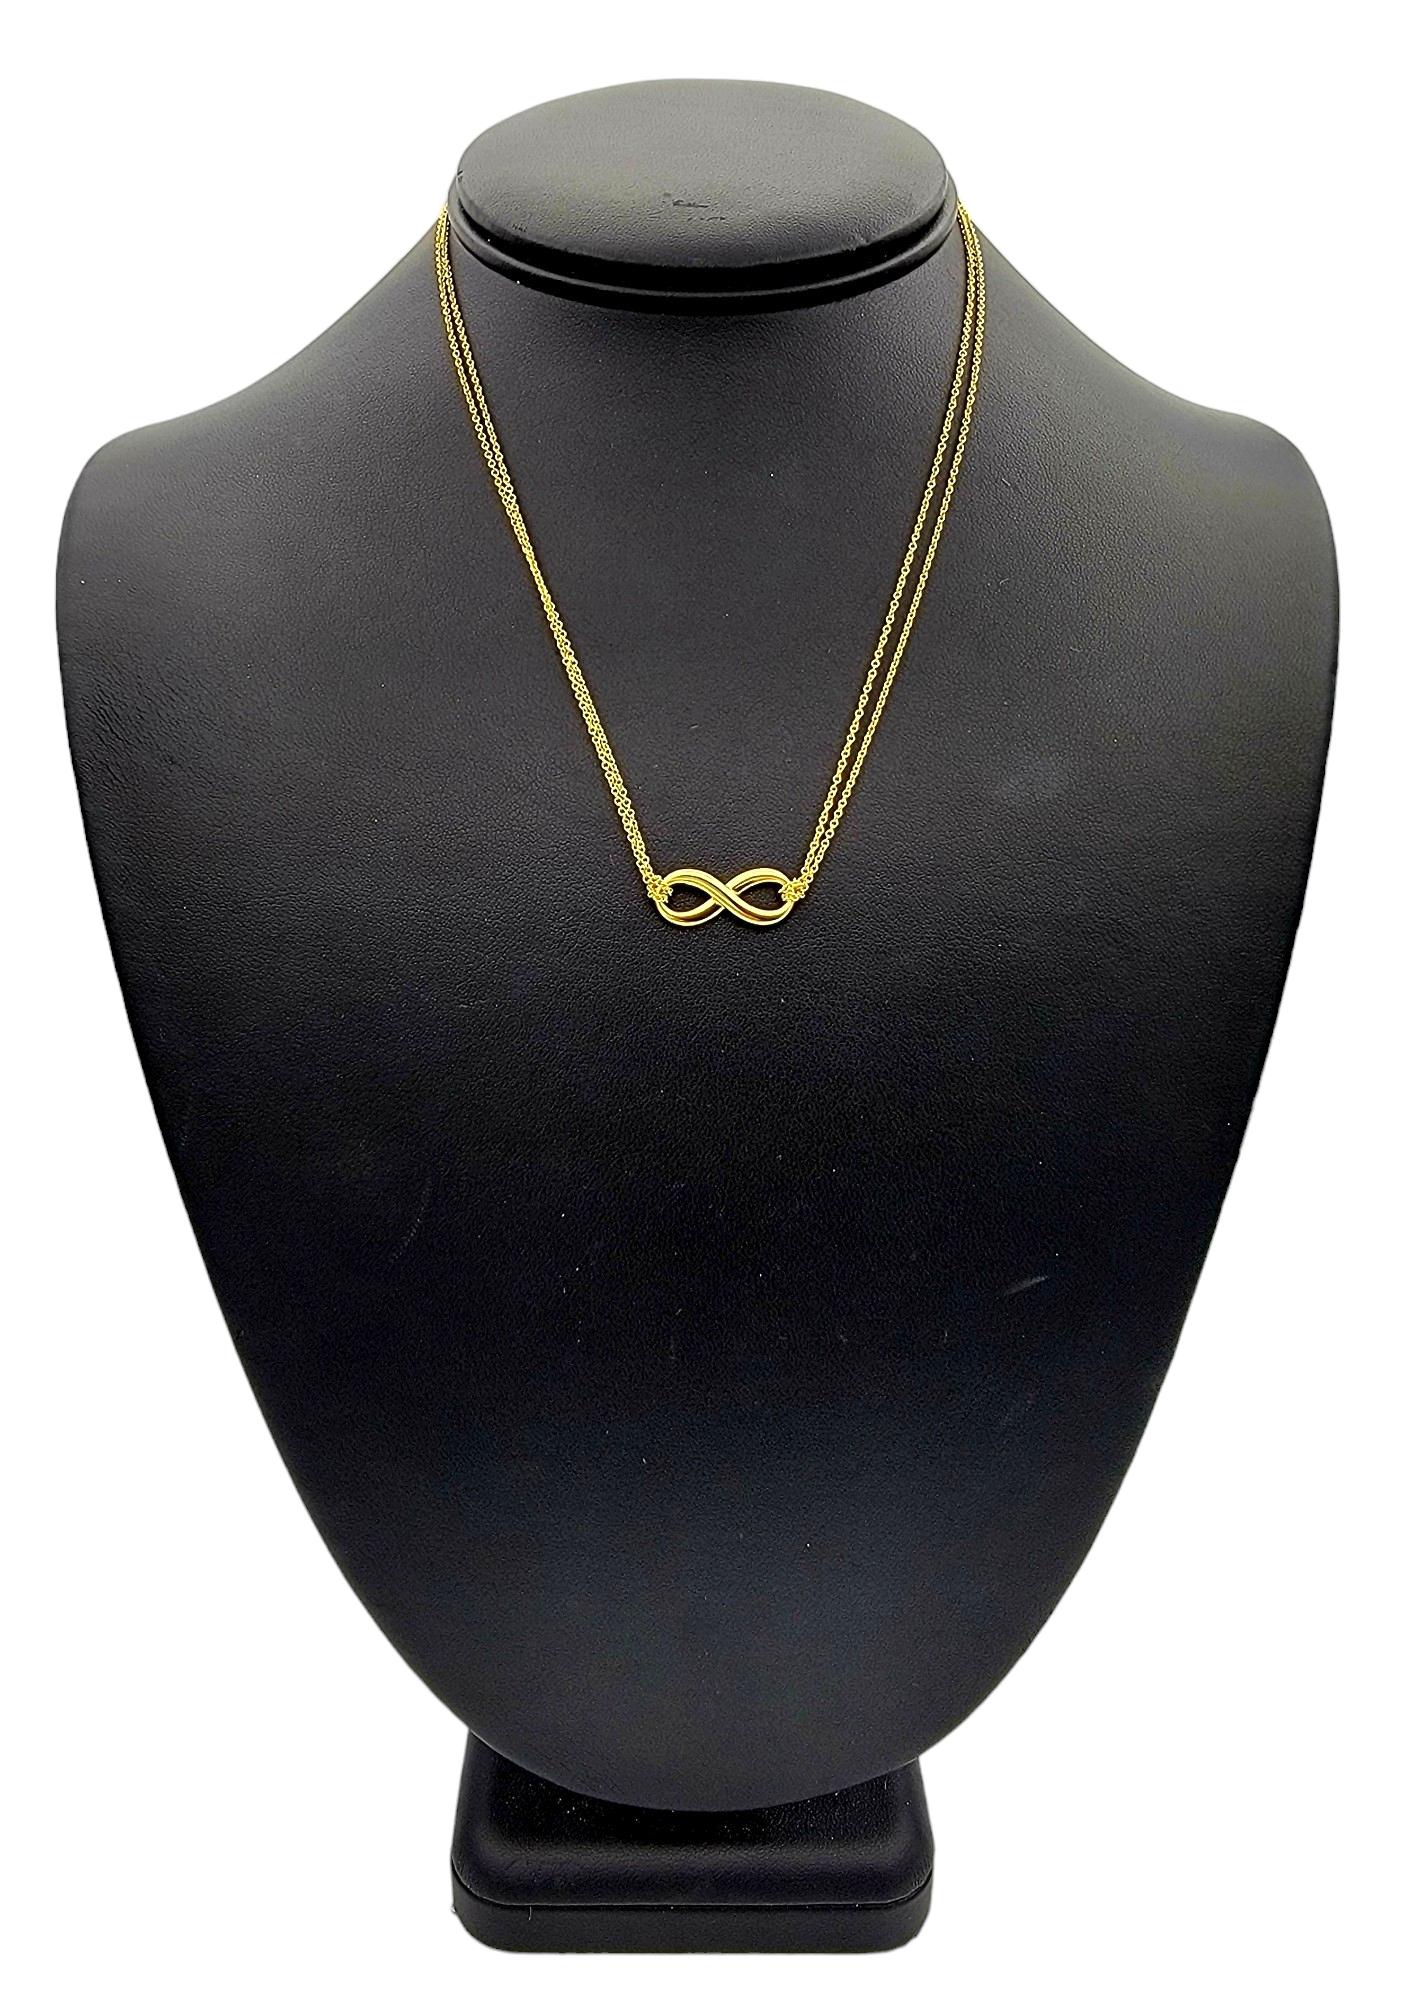 Tiffany & Co. Double Chain Infinity Pendant Necklace Set in 18 Karat Yellow Gold For Sale 2